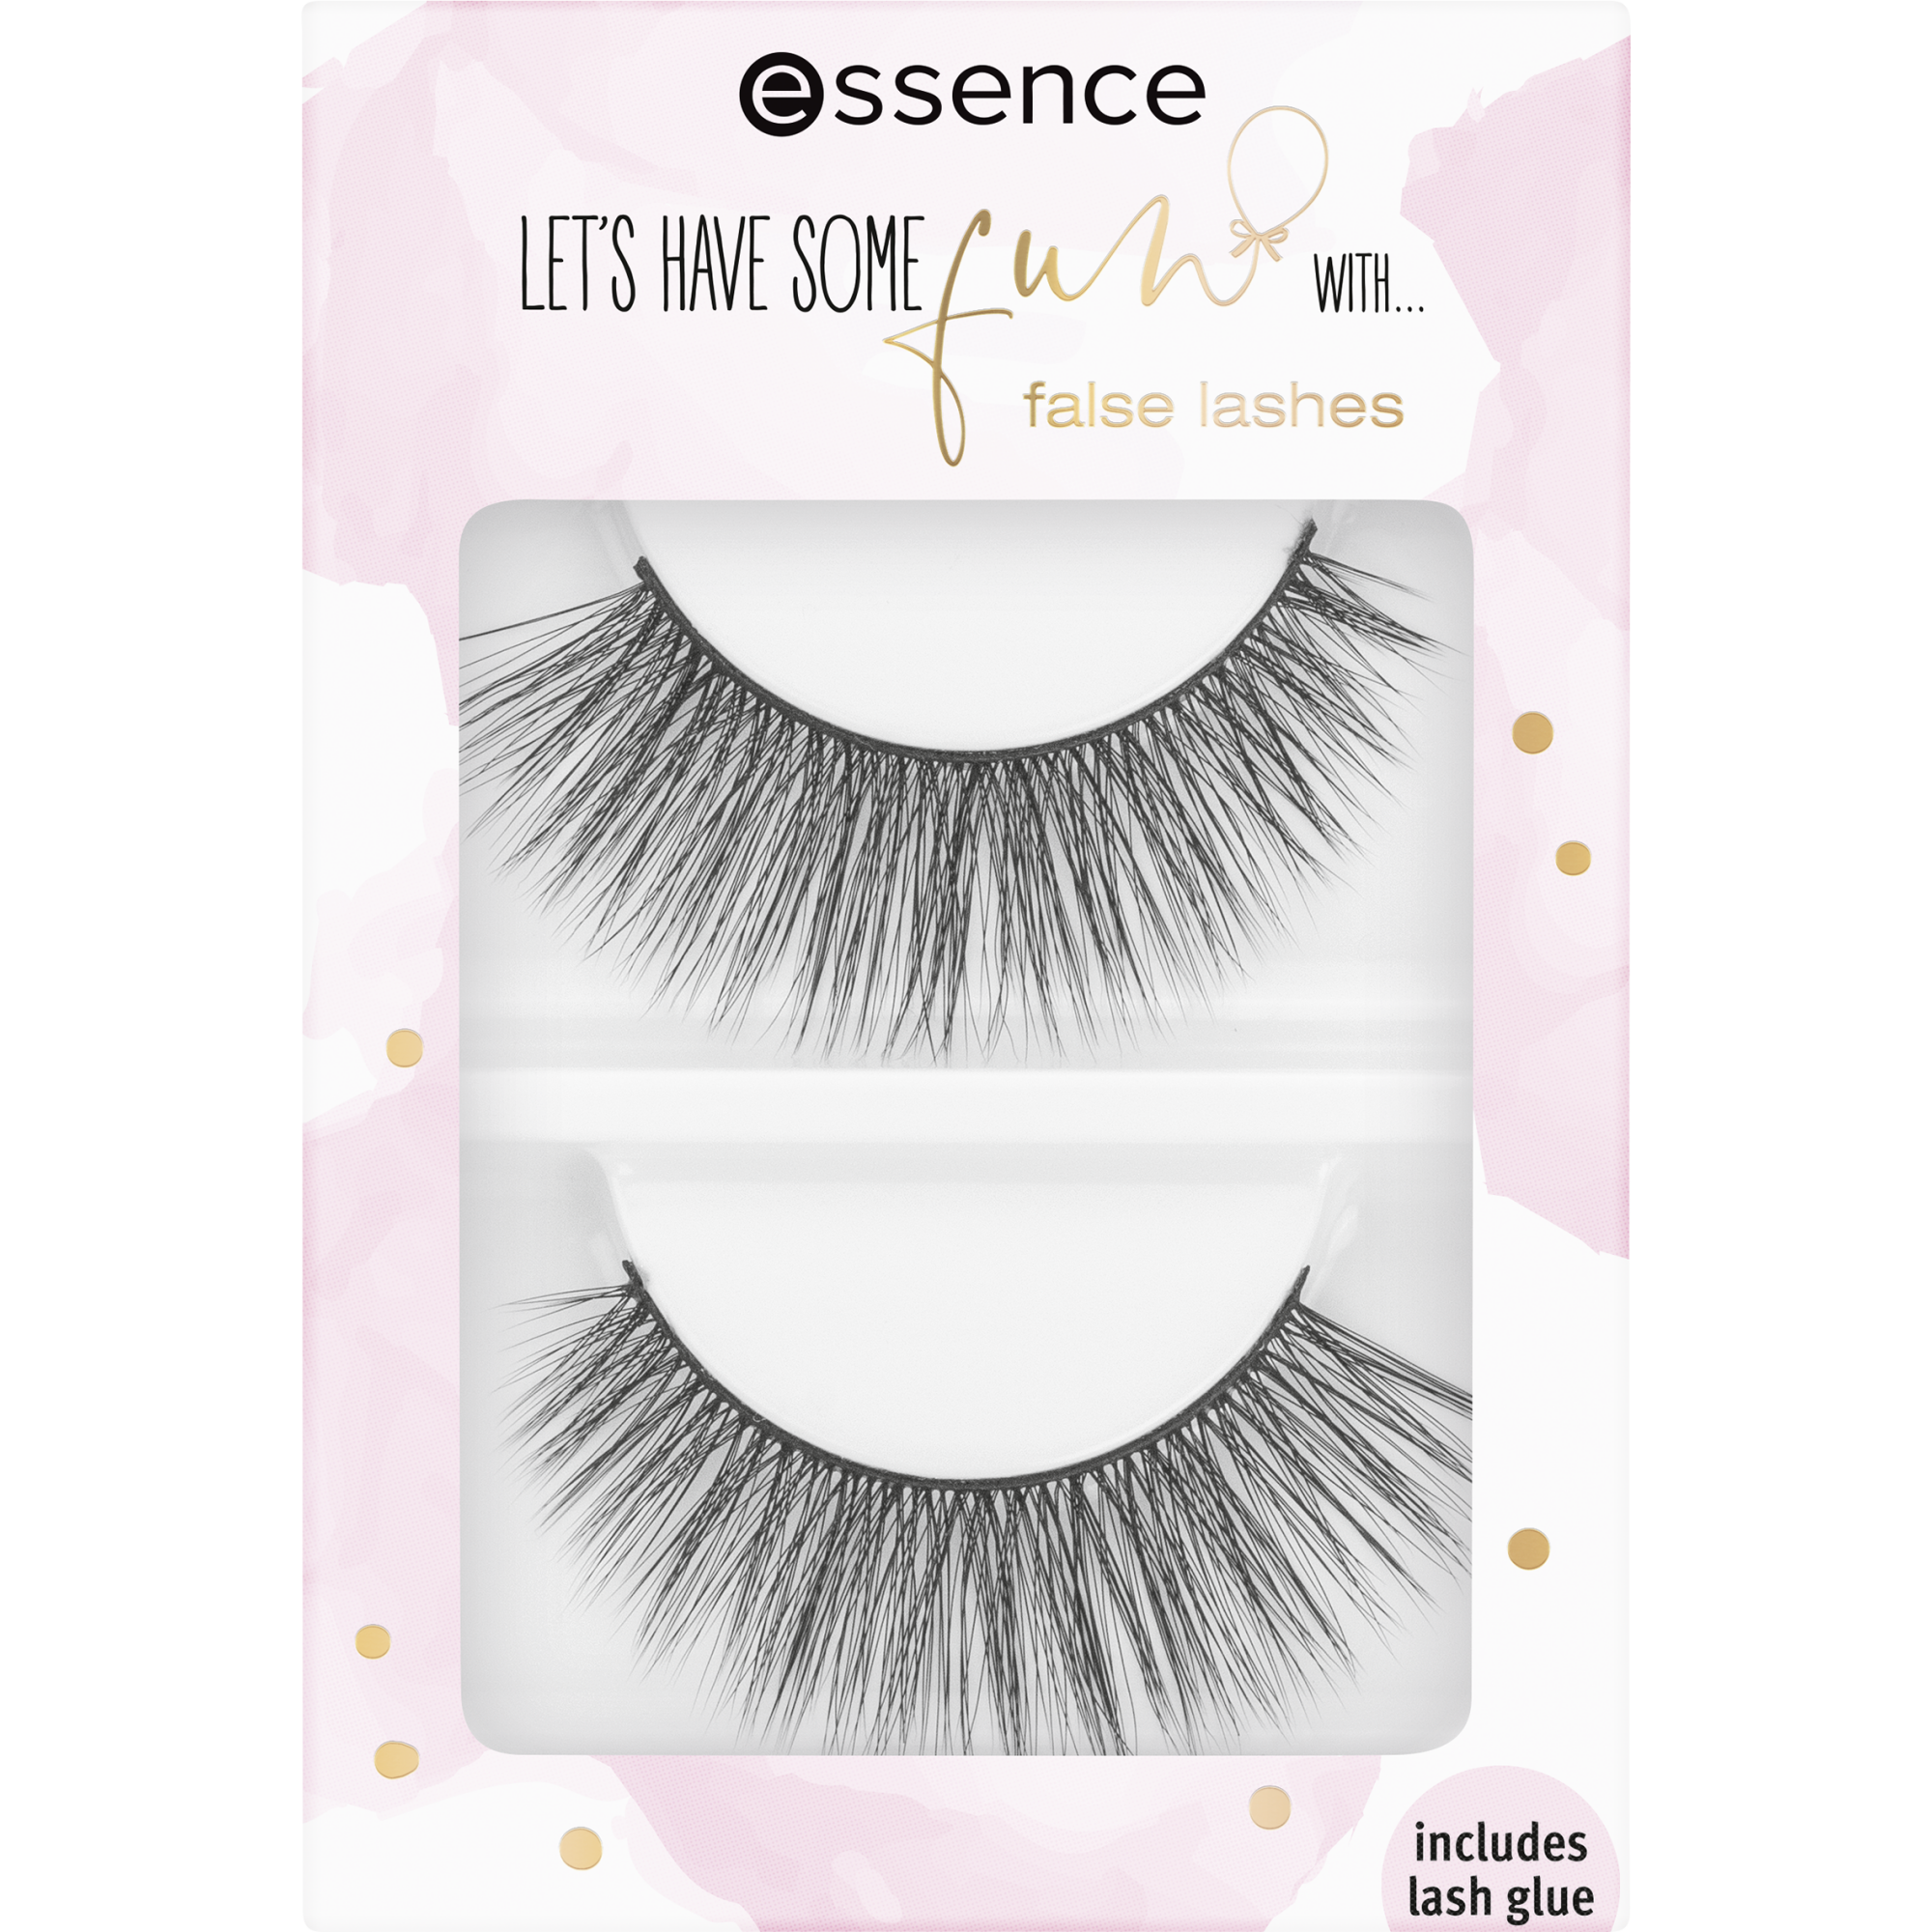 essence LET'S HAVE SOME fun WITH... false lashes